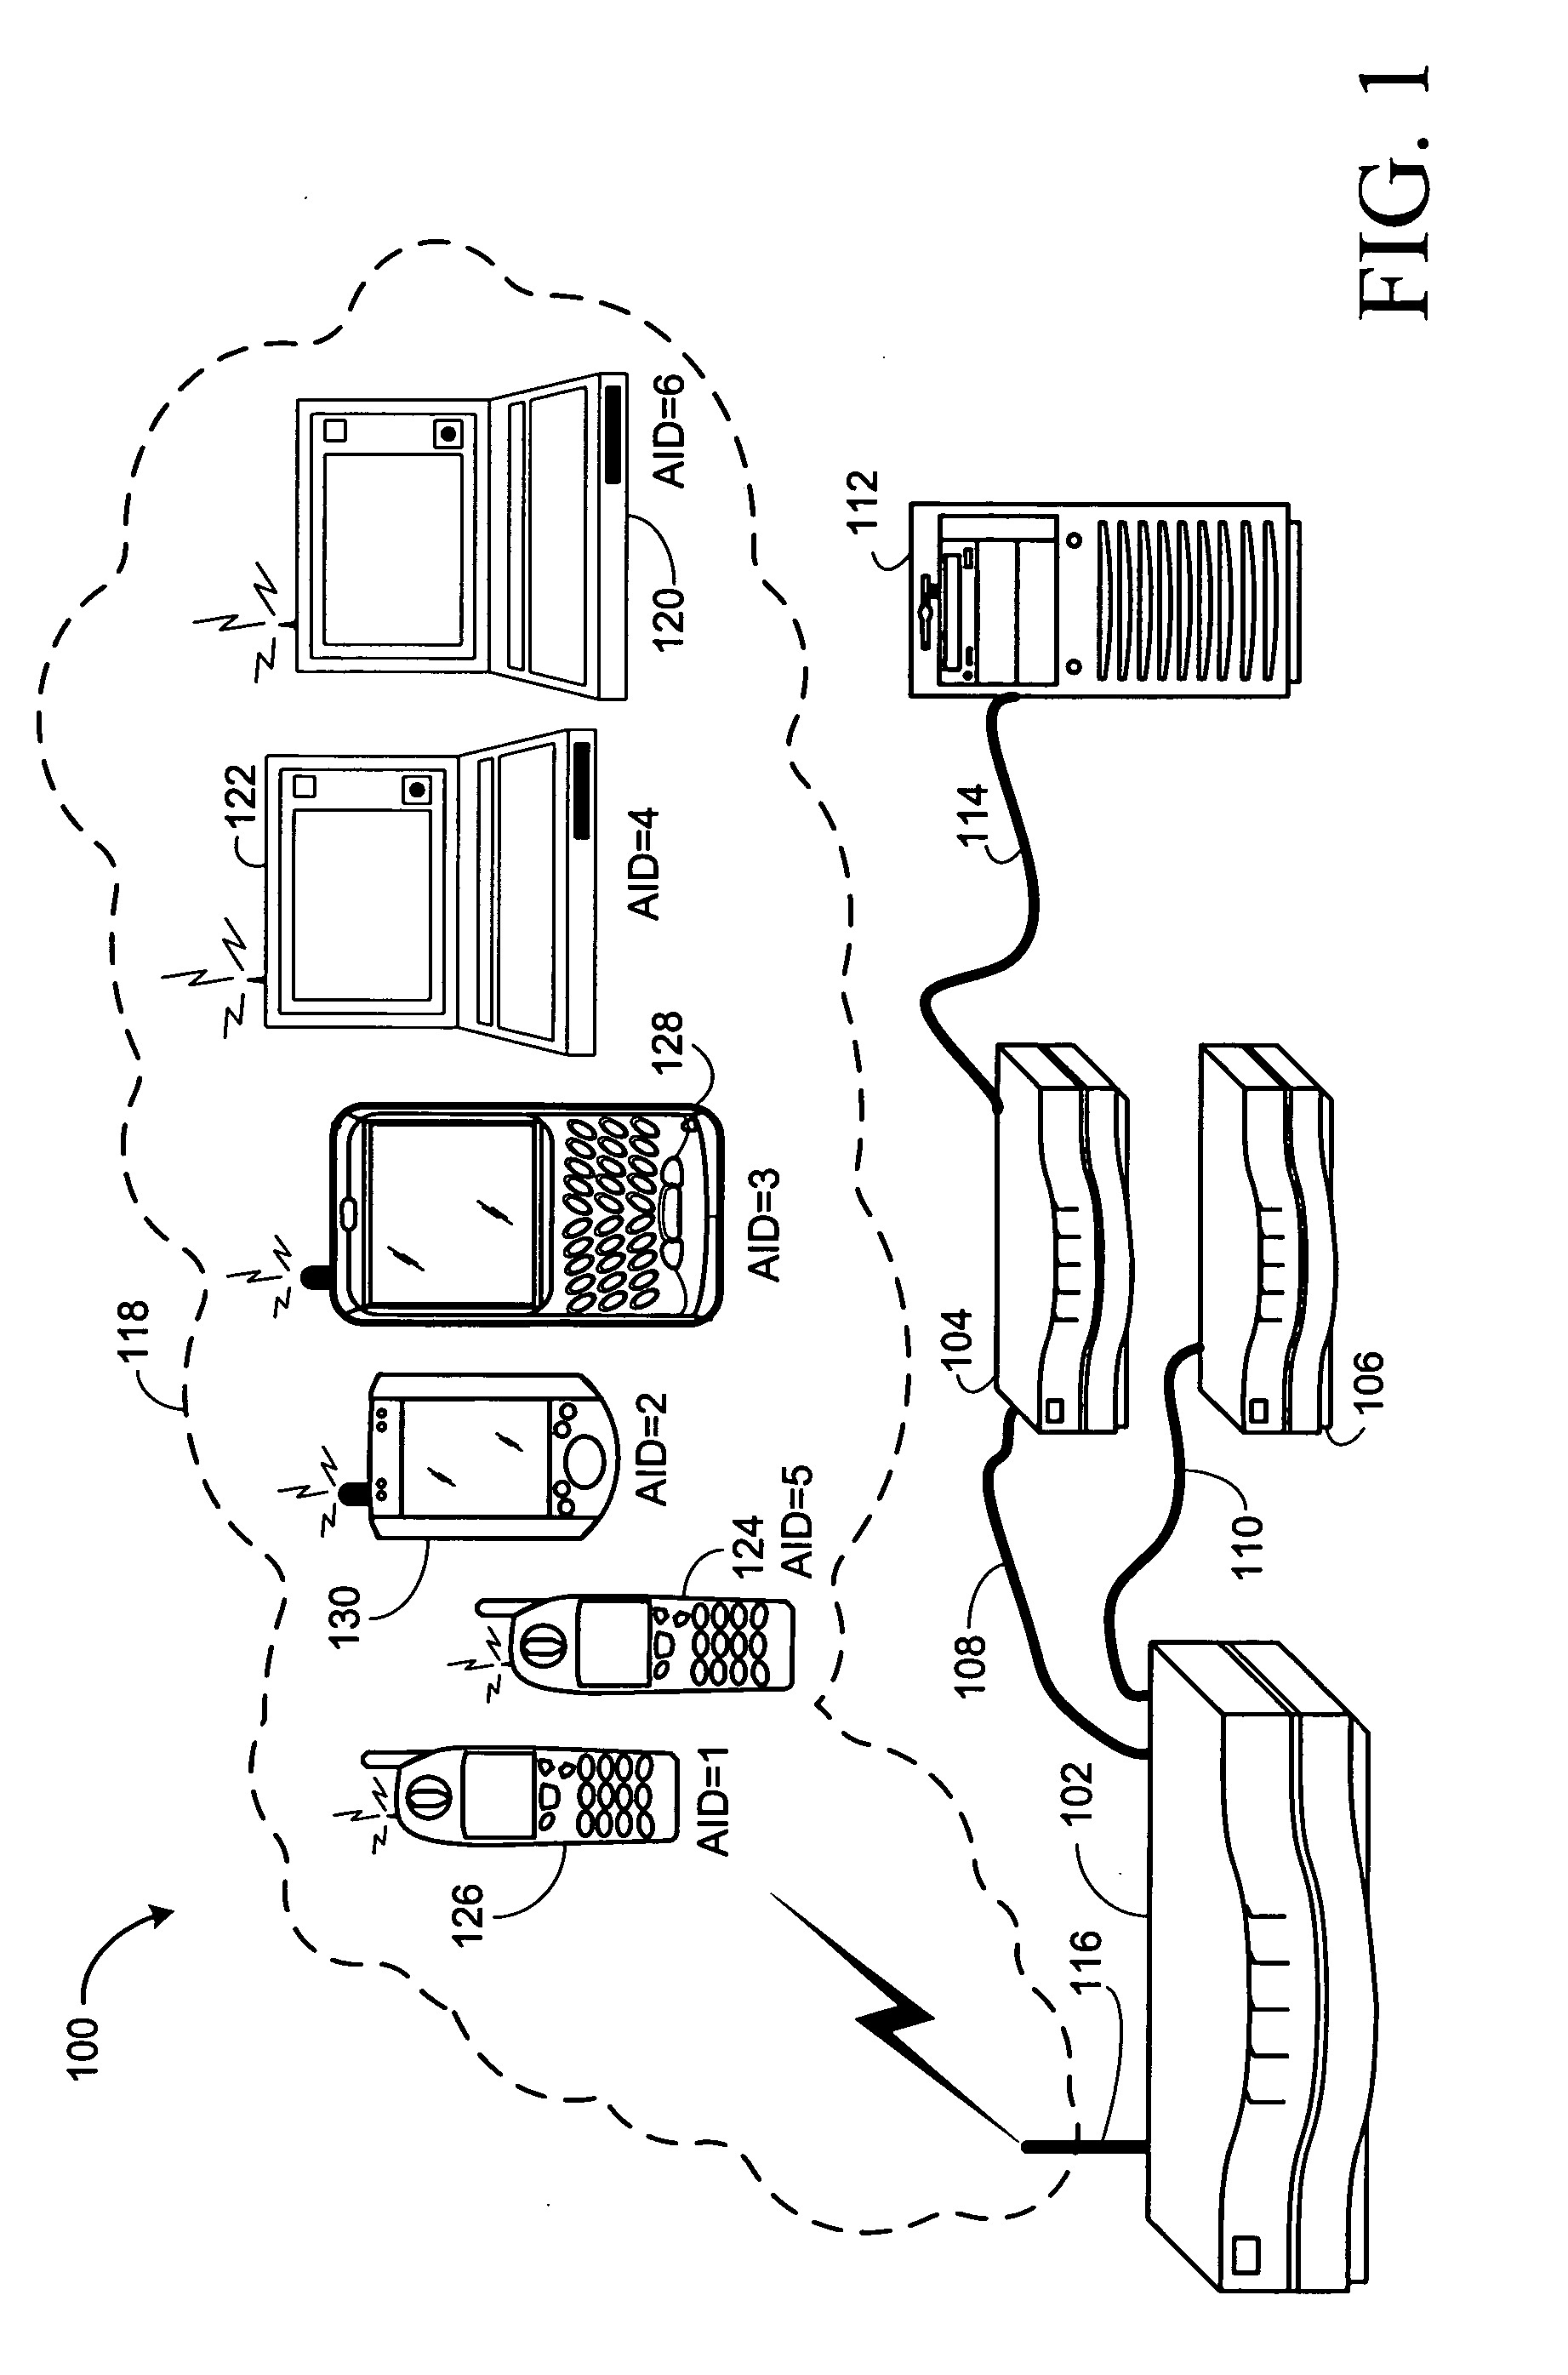 Apparatus and methods for delivery traffic indication message (DTIM) periods in a wireless network